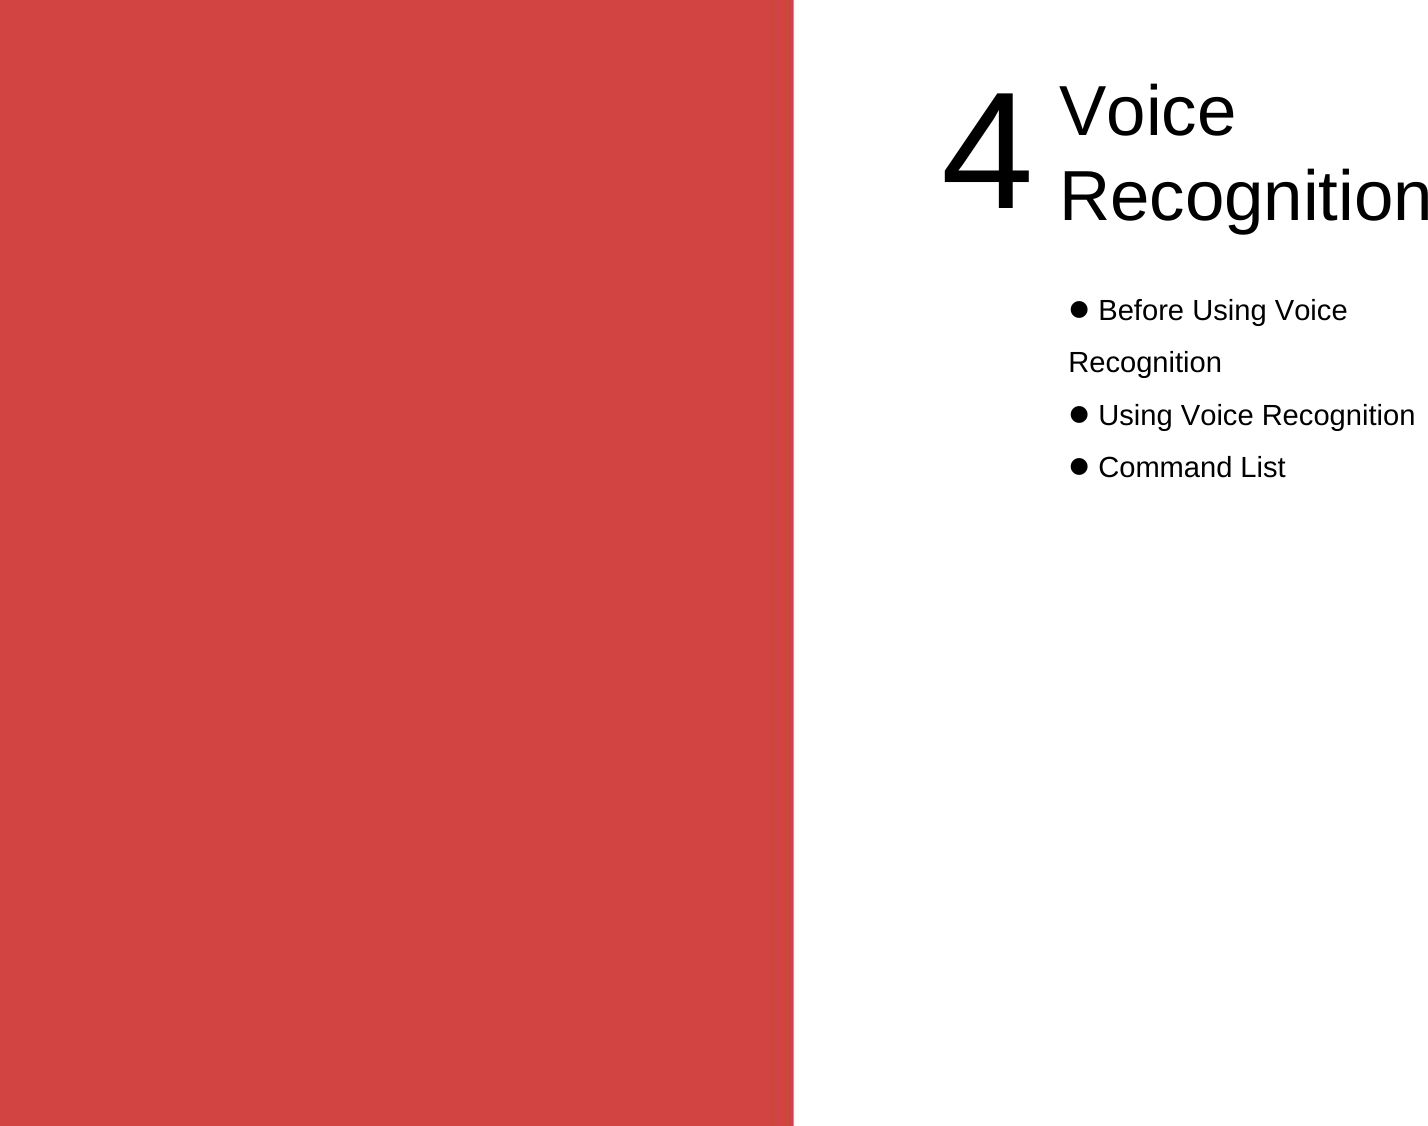  Before Using Voice RecognitionUsing Voice RecognitionCommand List4VoiceRecognition